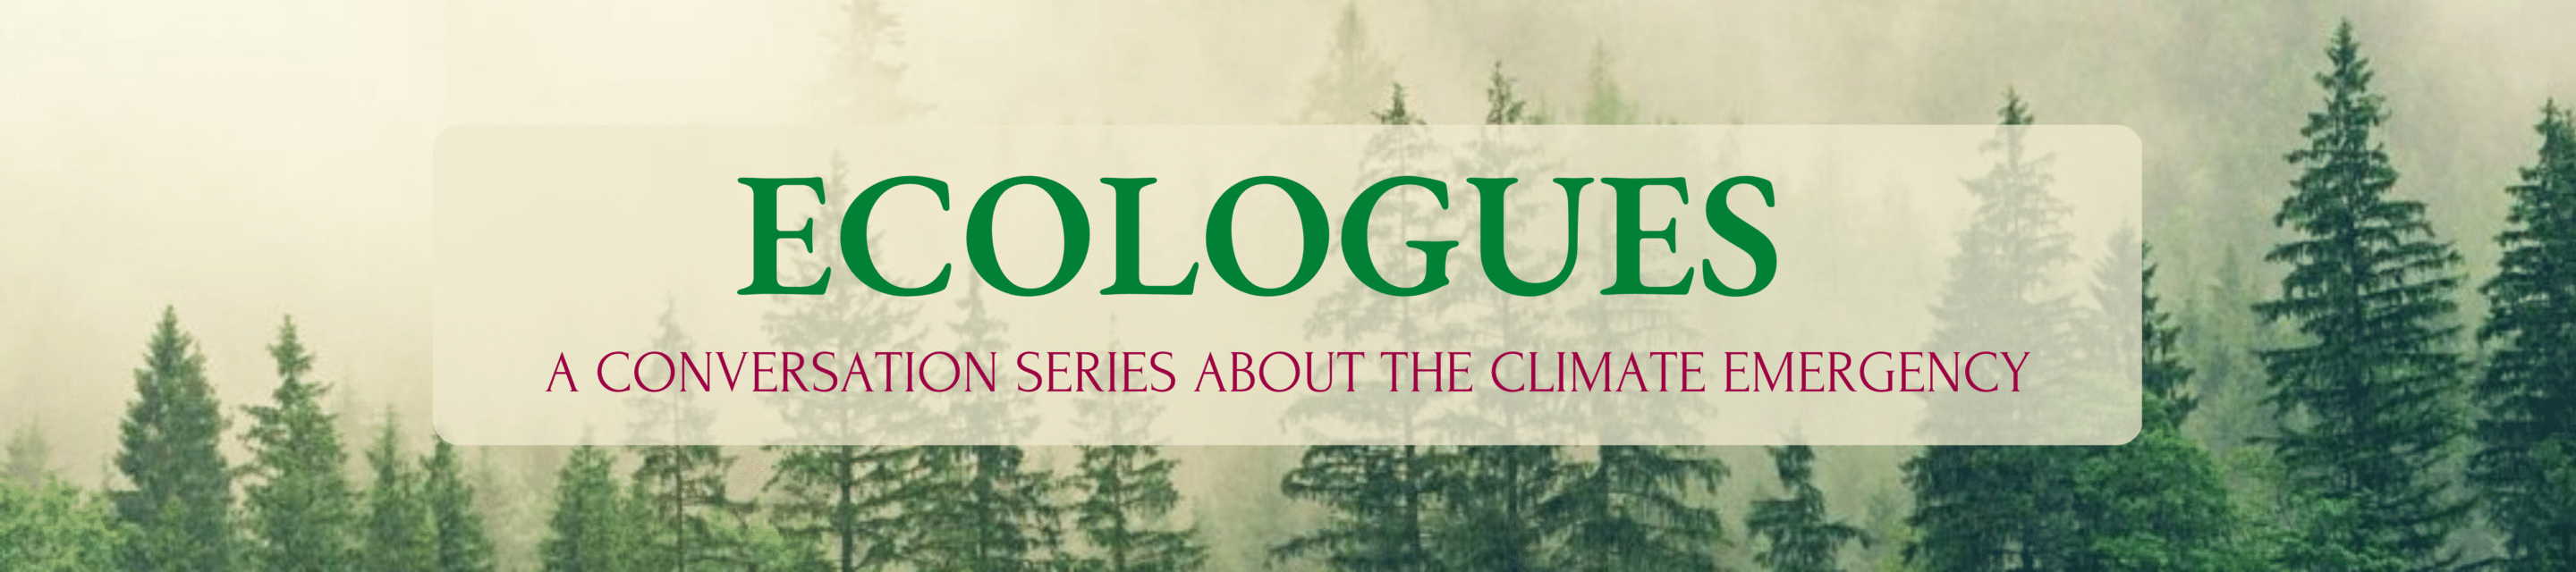 Ecologues Educational Resources banners